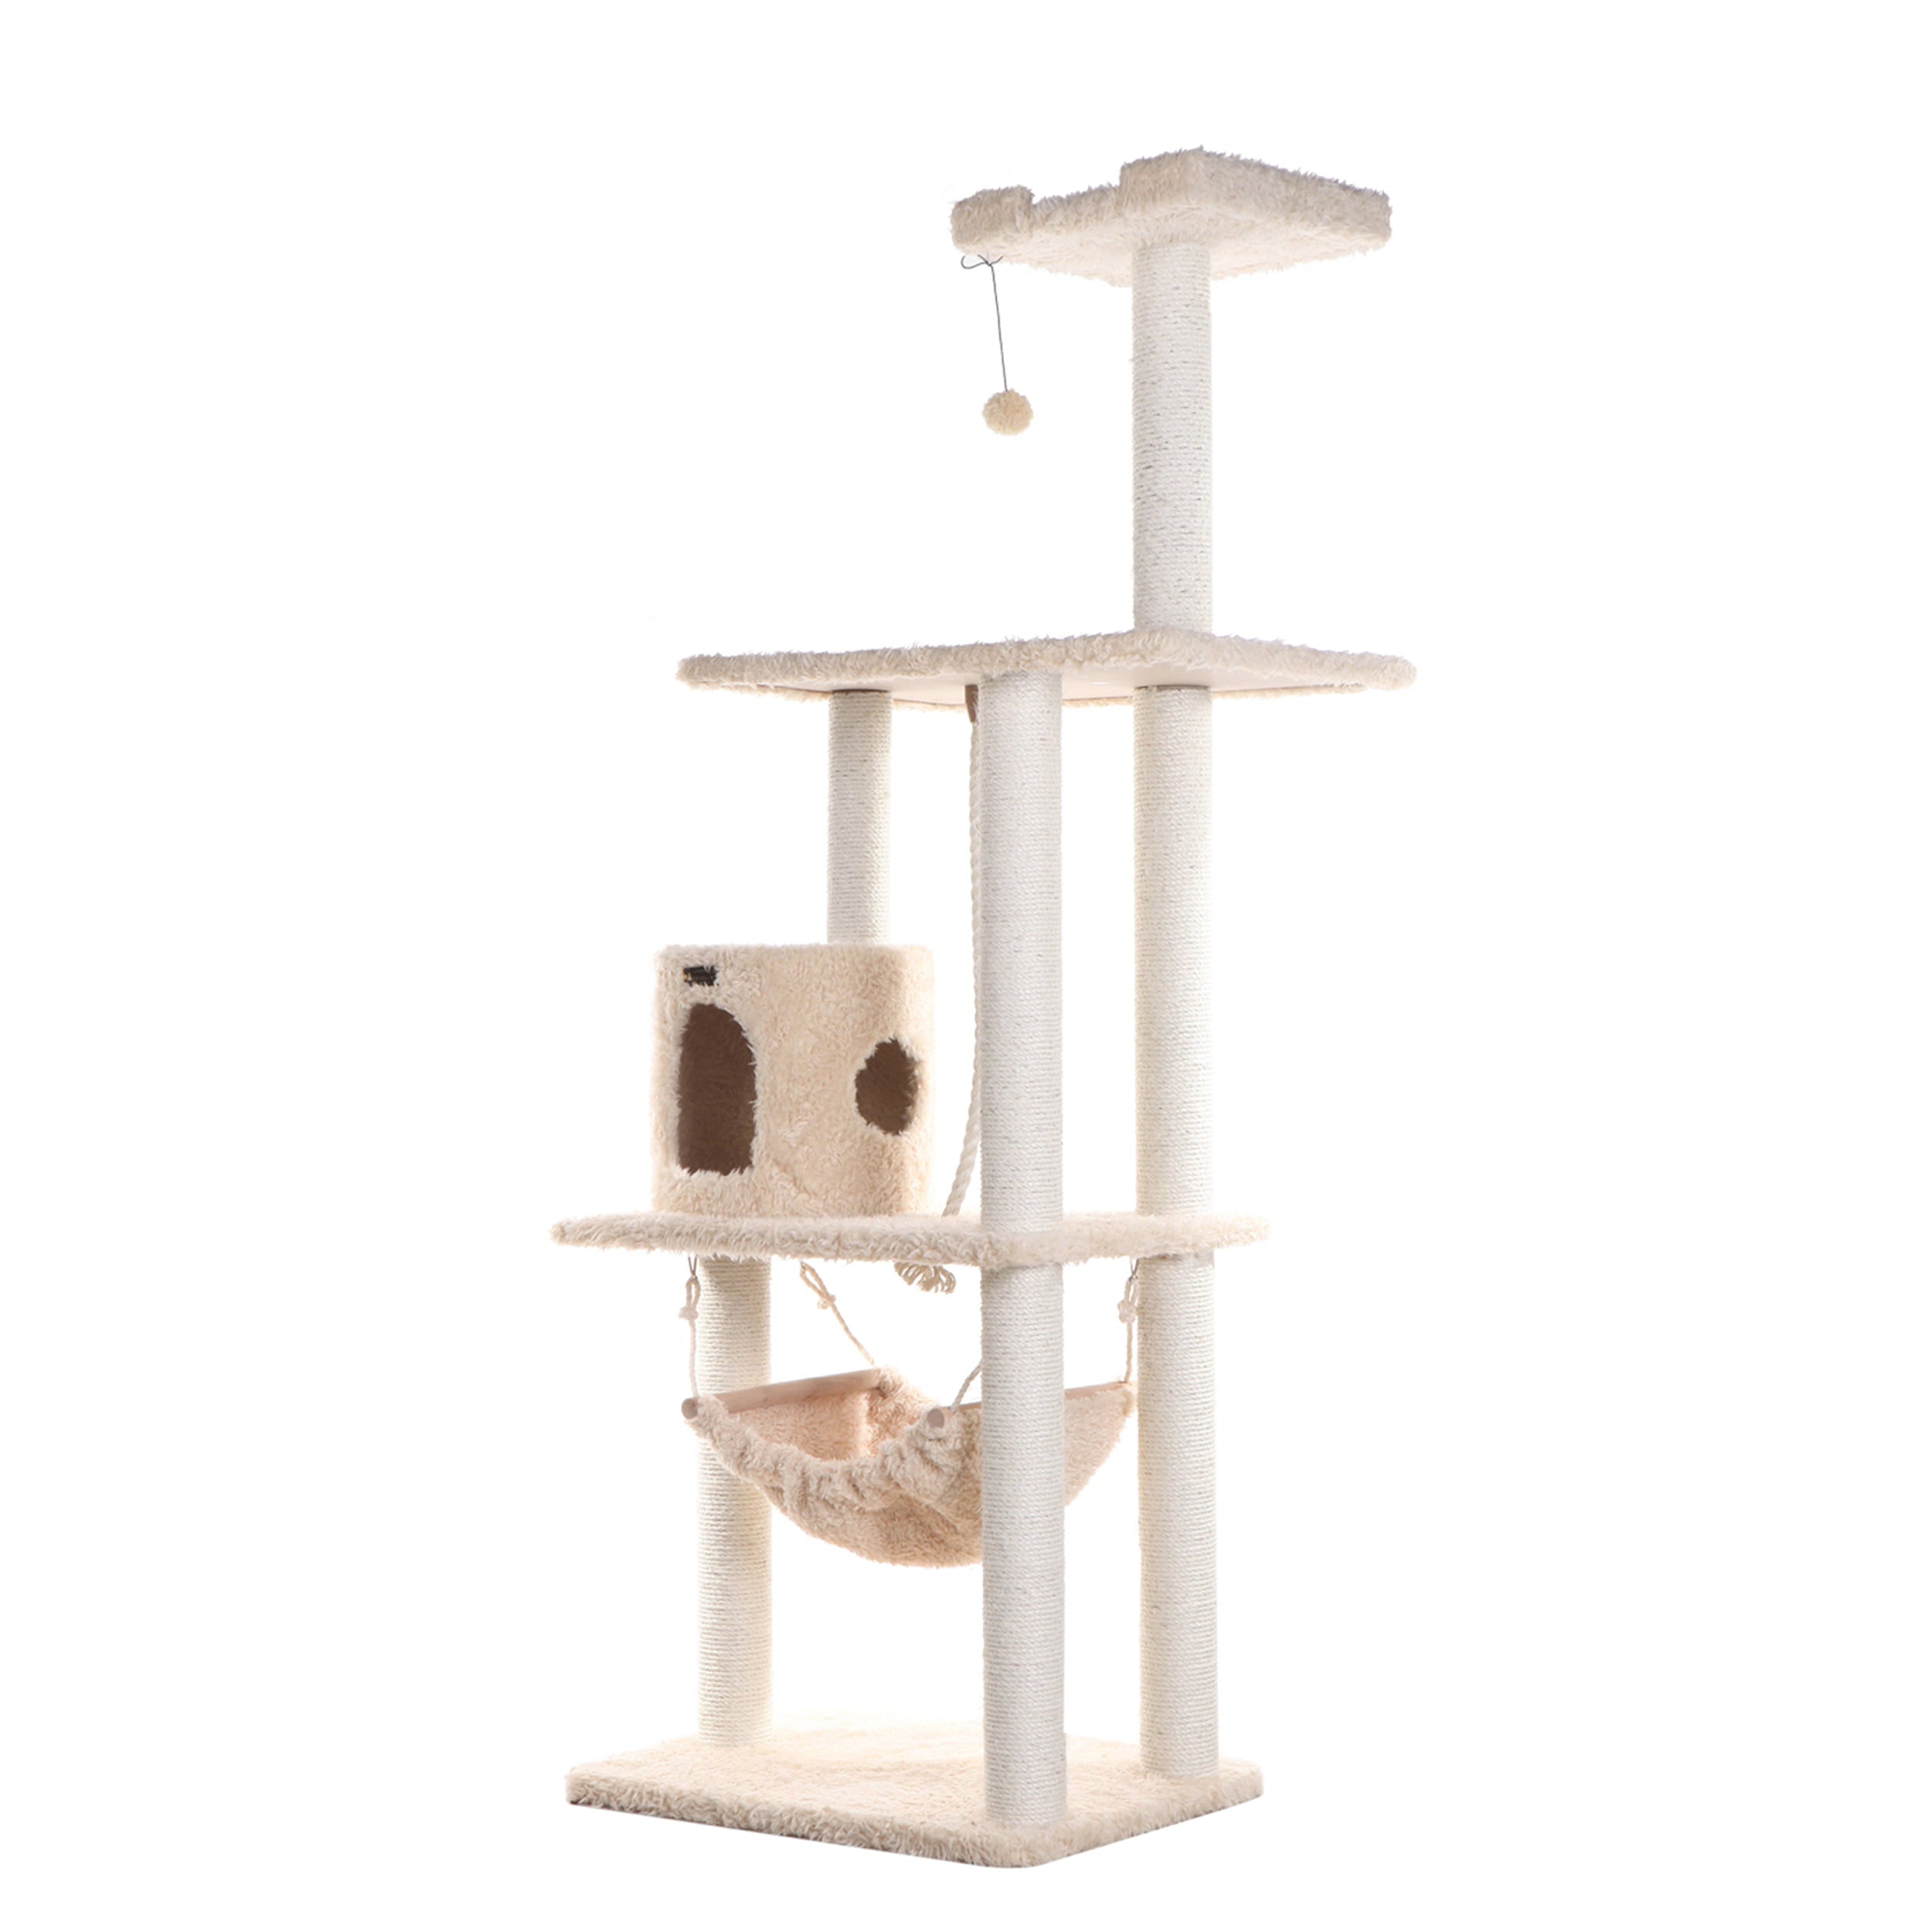 Armarkat 70-in real wood Cat Furniture，Ultra thick Faux Fur Covered Cat Condo House A7005， Beige